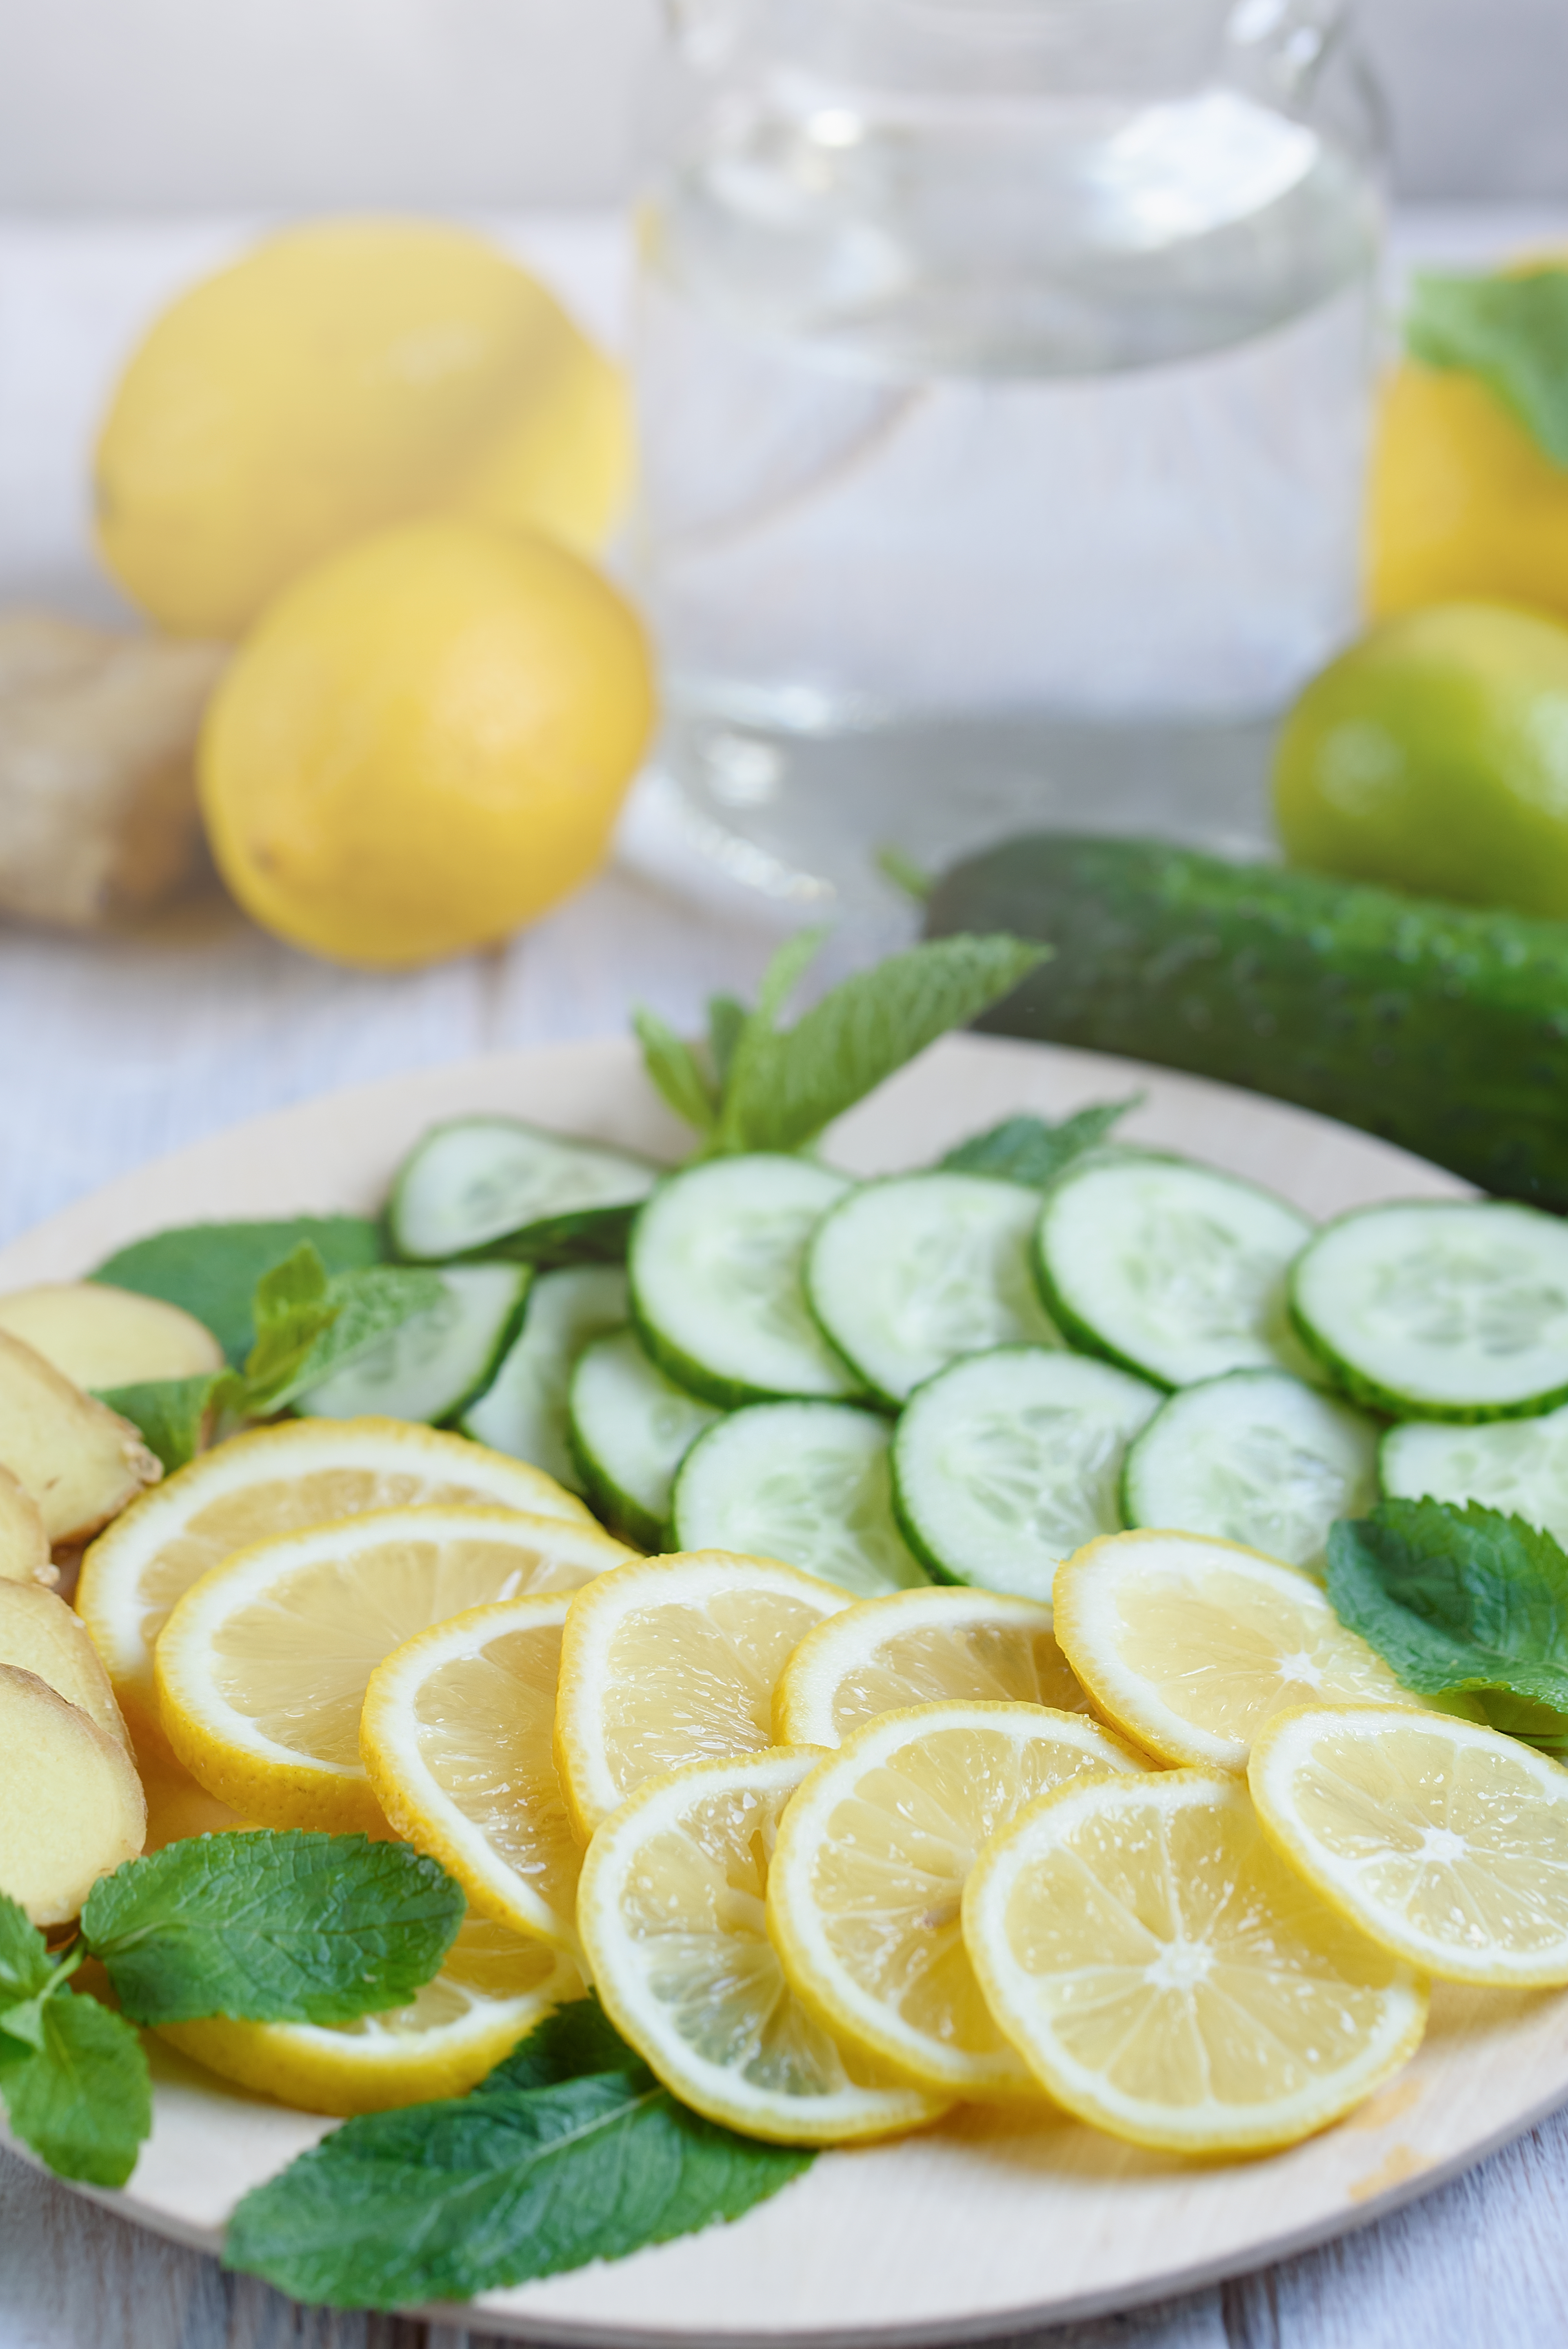 sassi-water-cooking-ingredients-making-sassi-drink-lemon-cucumbers-ginger-root-mint-round-wooden-tray